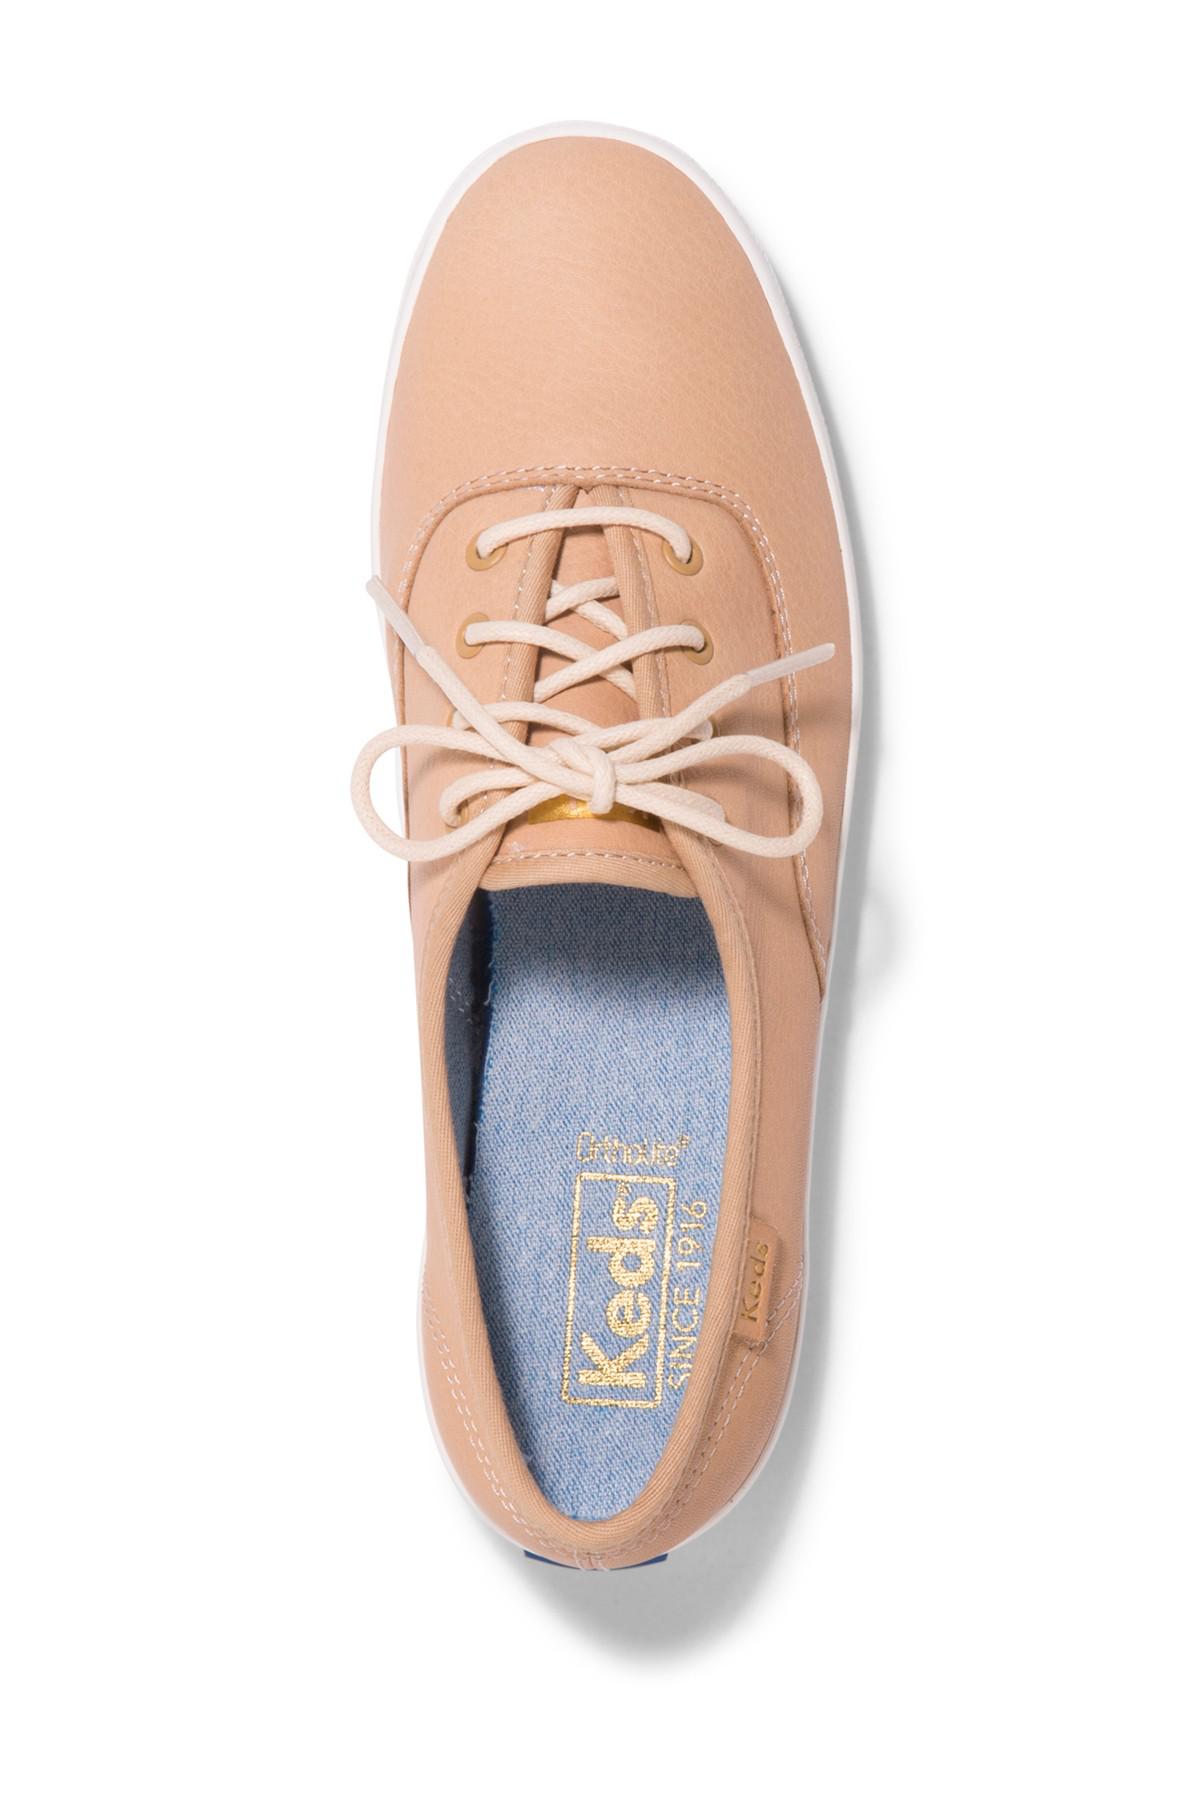 Keds Champion Leather Sneaker in Natural | Lyst